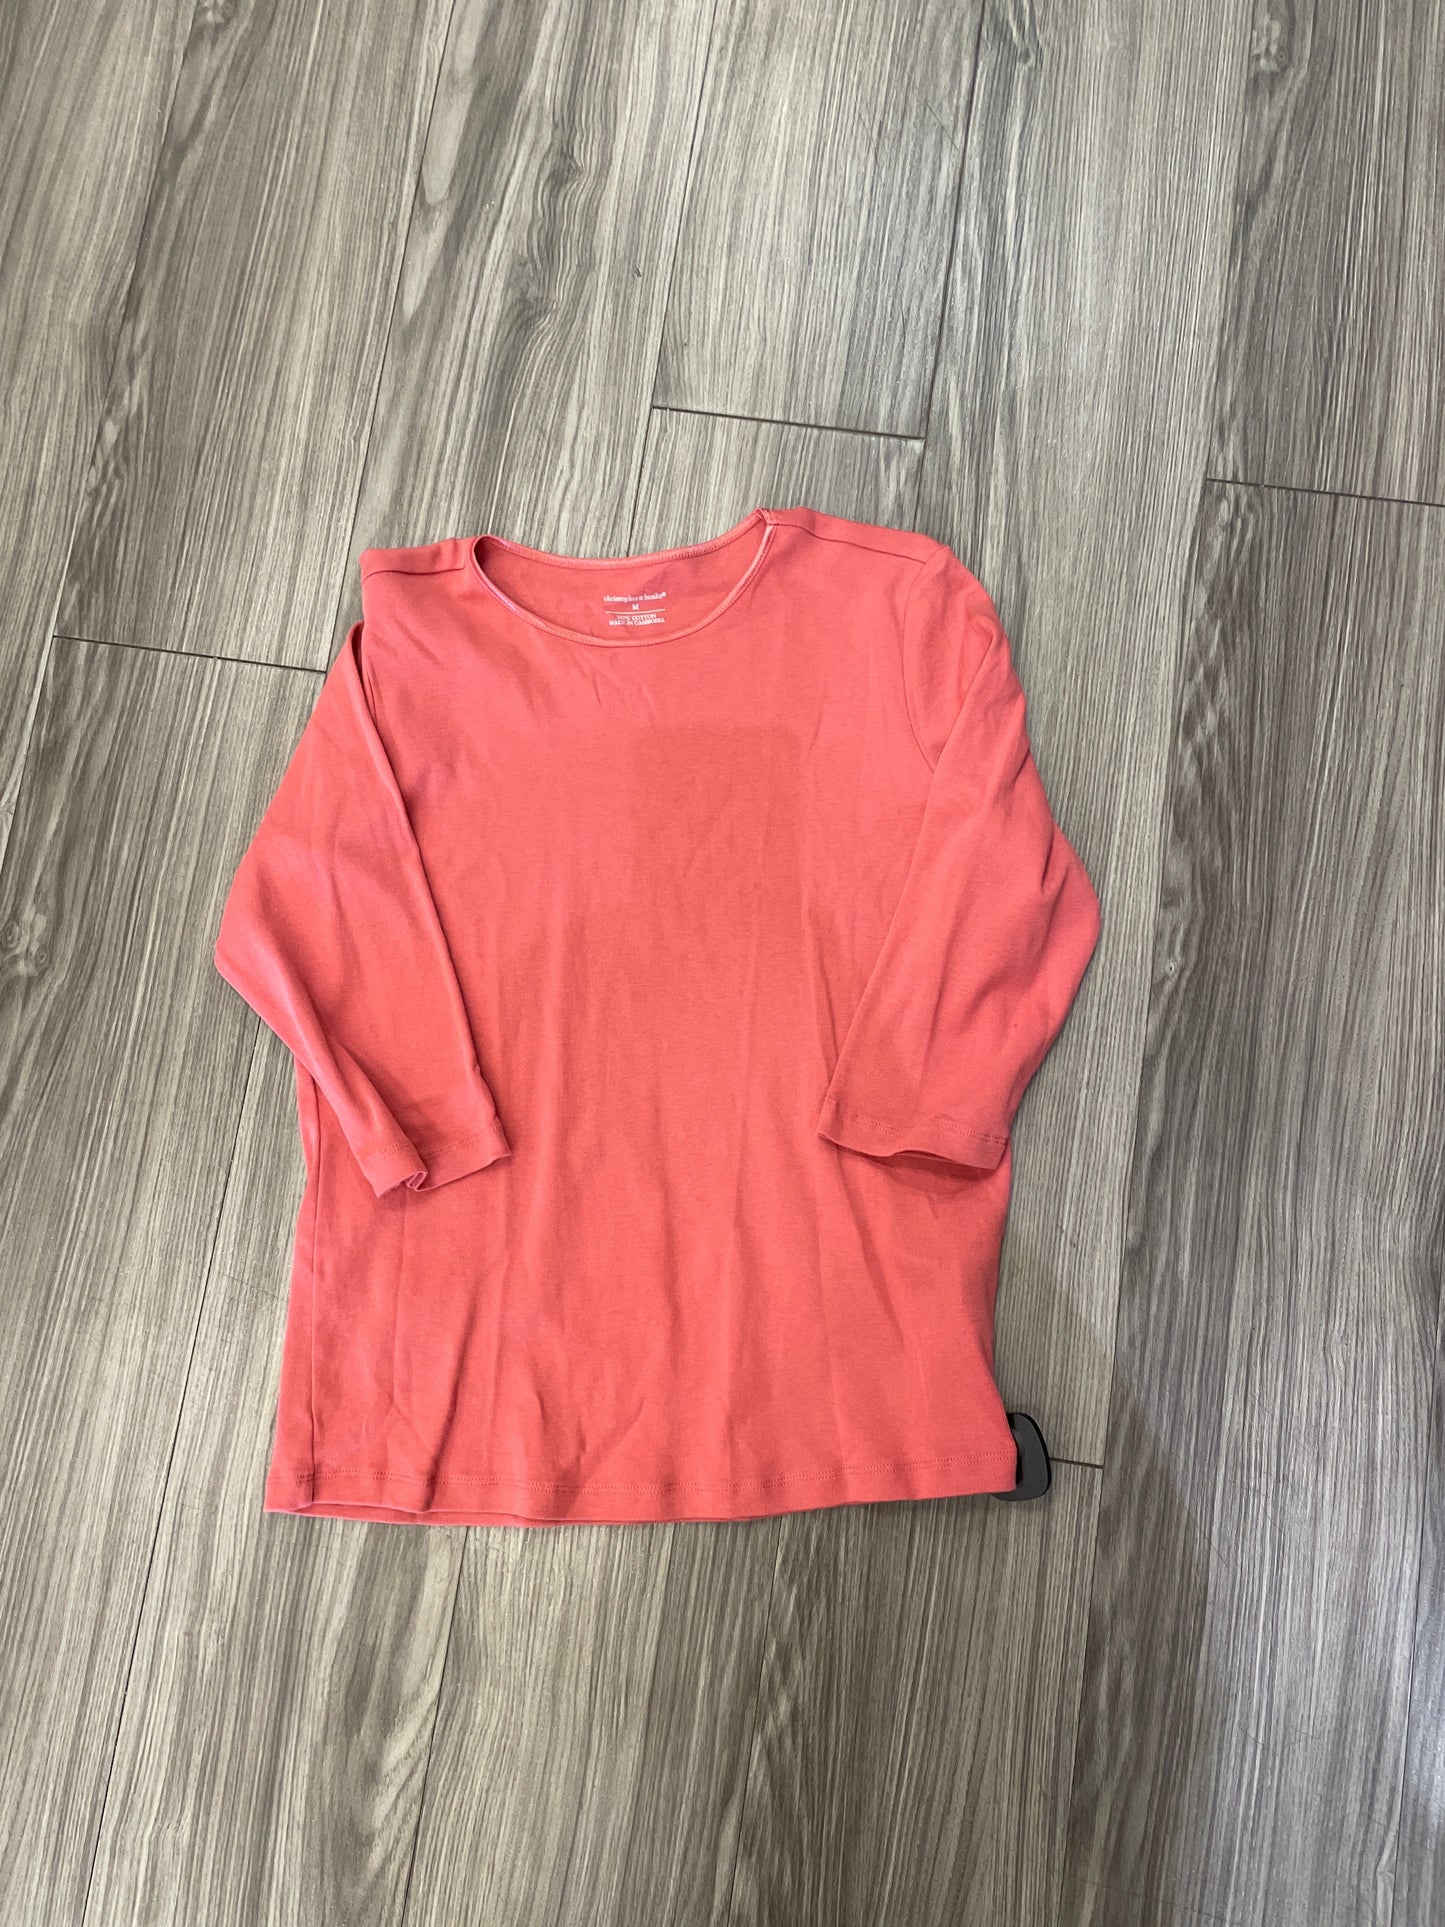 Coral Top Long Sleeve Christopher And Banks, Size M